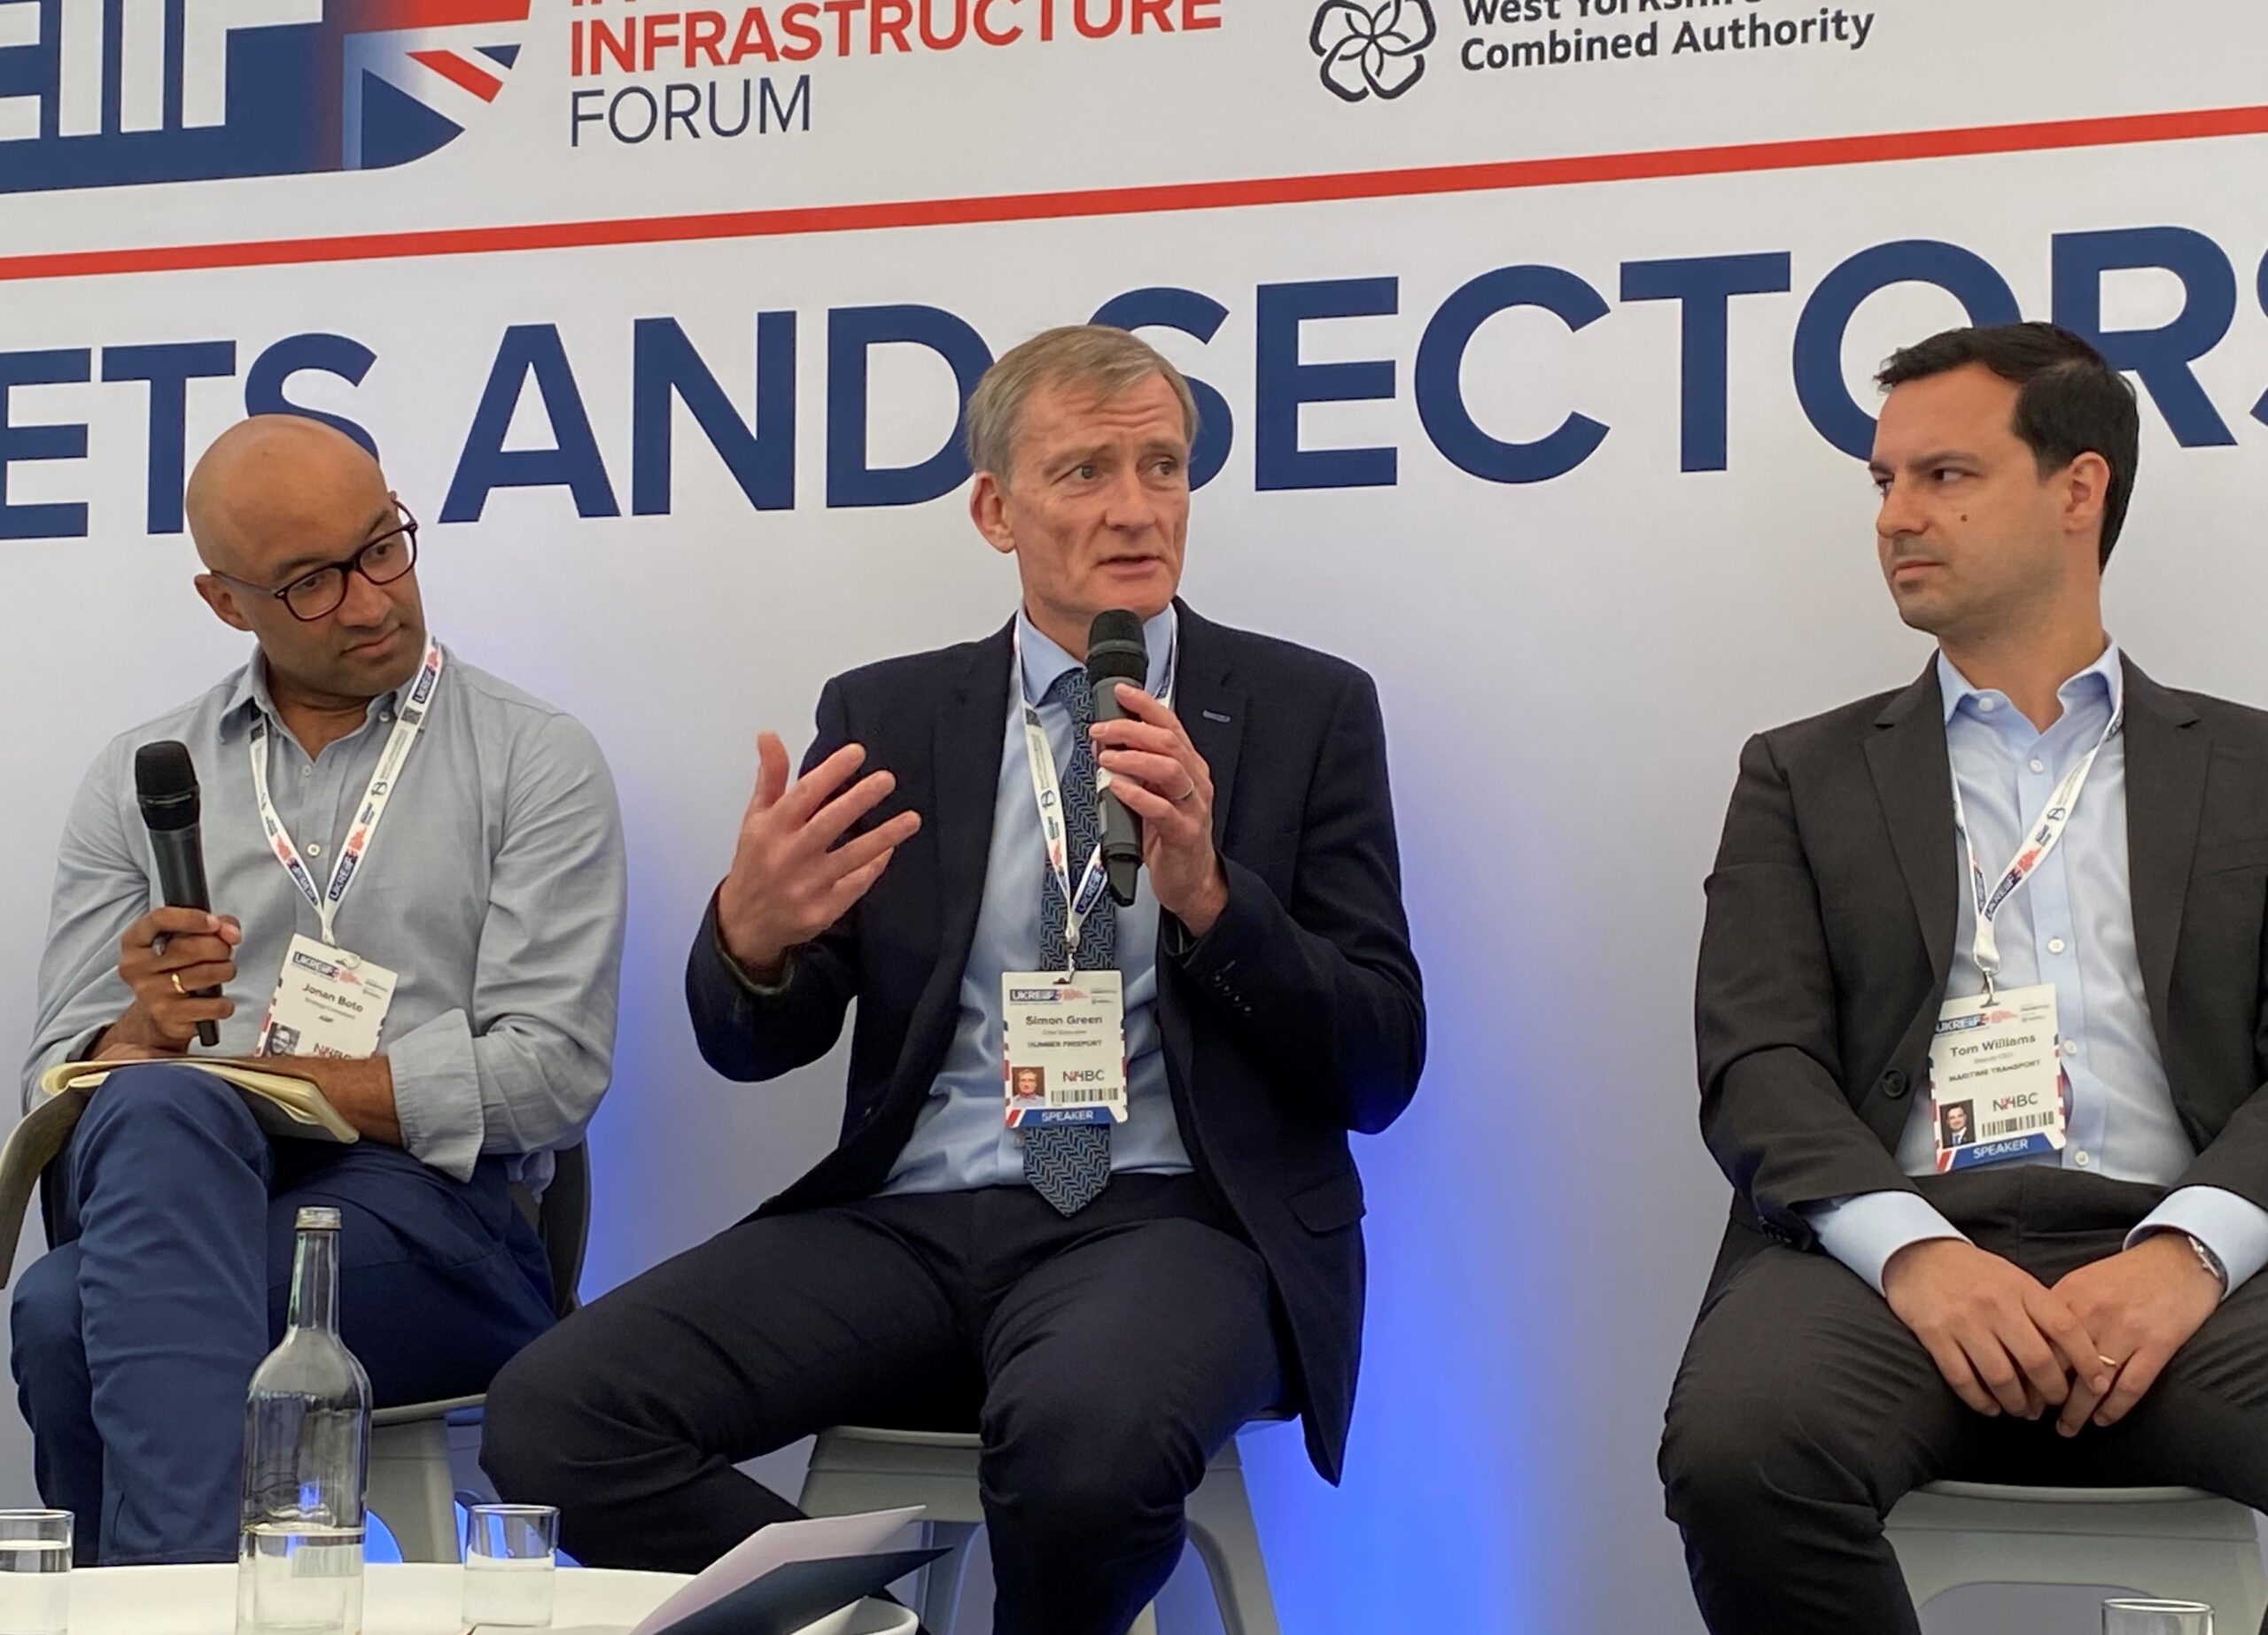 Humber’s unique investment proposition takes centre stage at UKREiiF